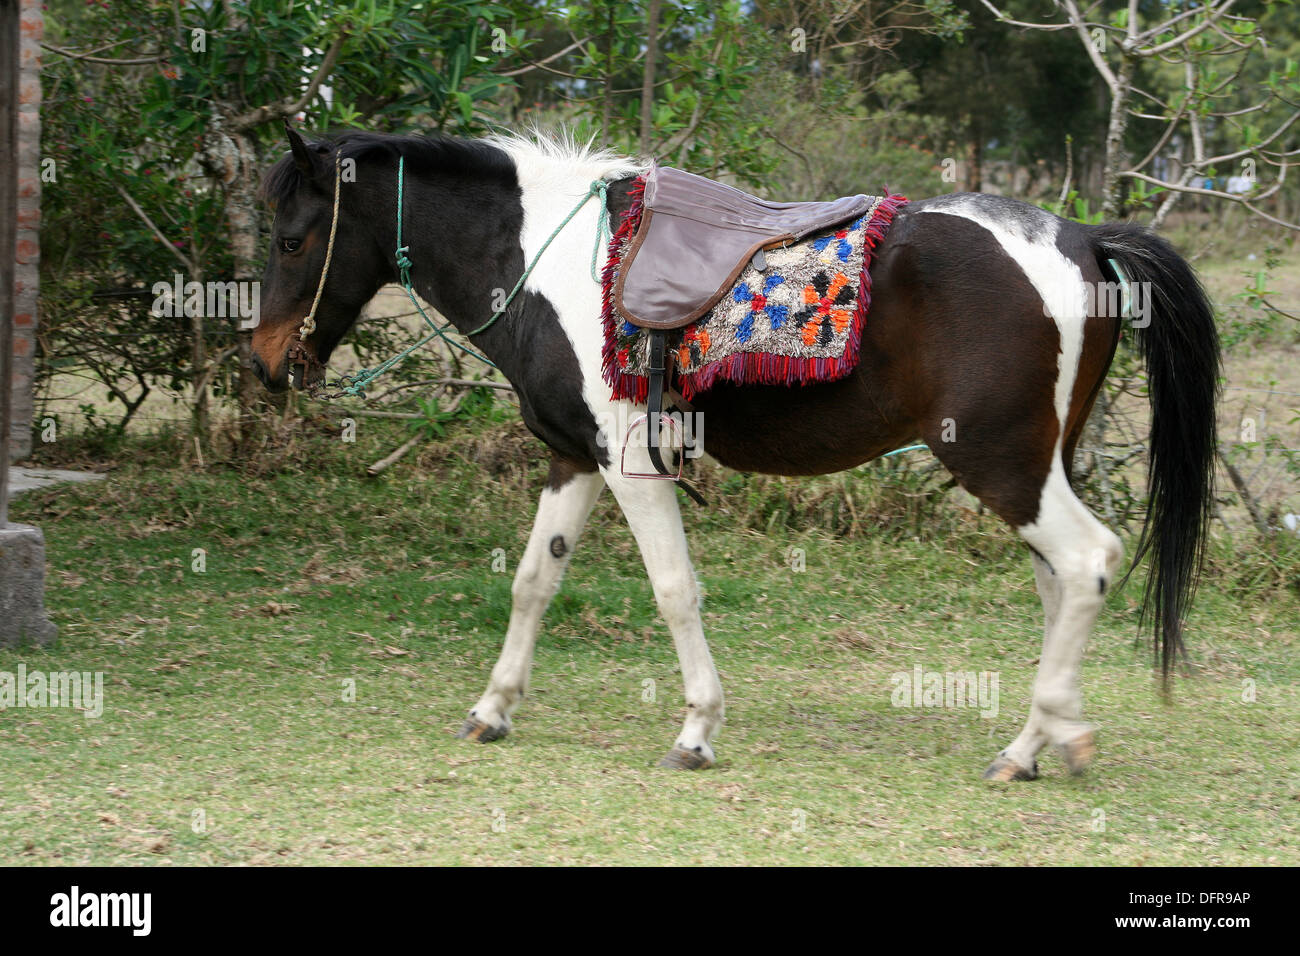 A brown and white horse wearing a saddle in a farmers pasture in Cotacachi, Ecuador Stock Photo